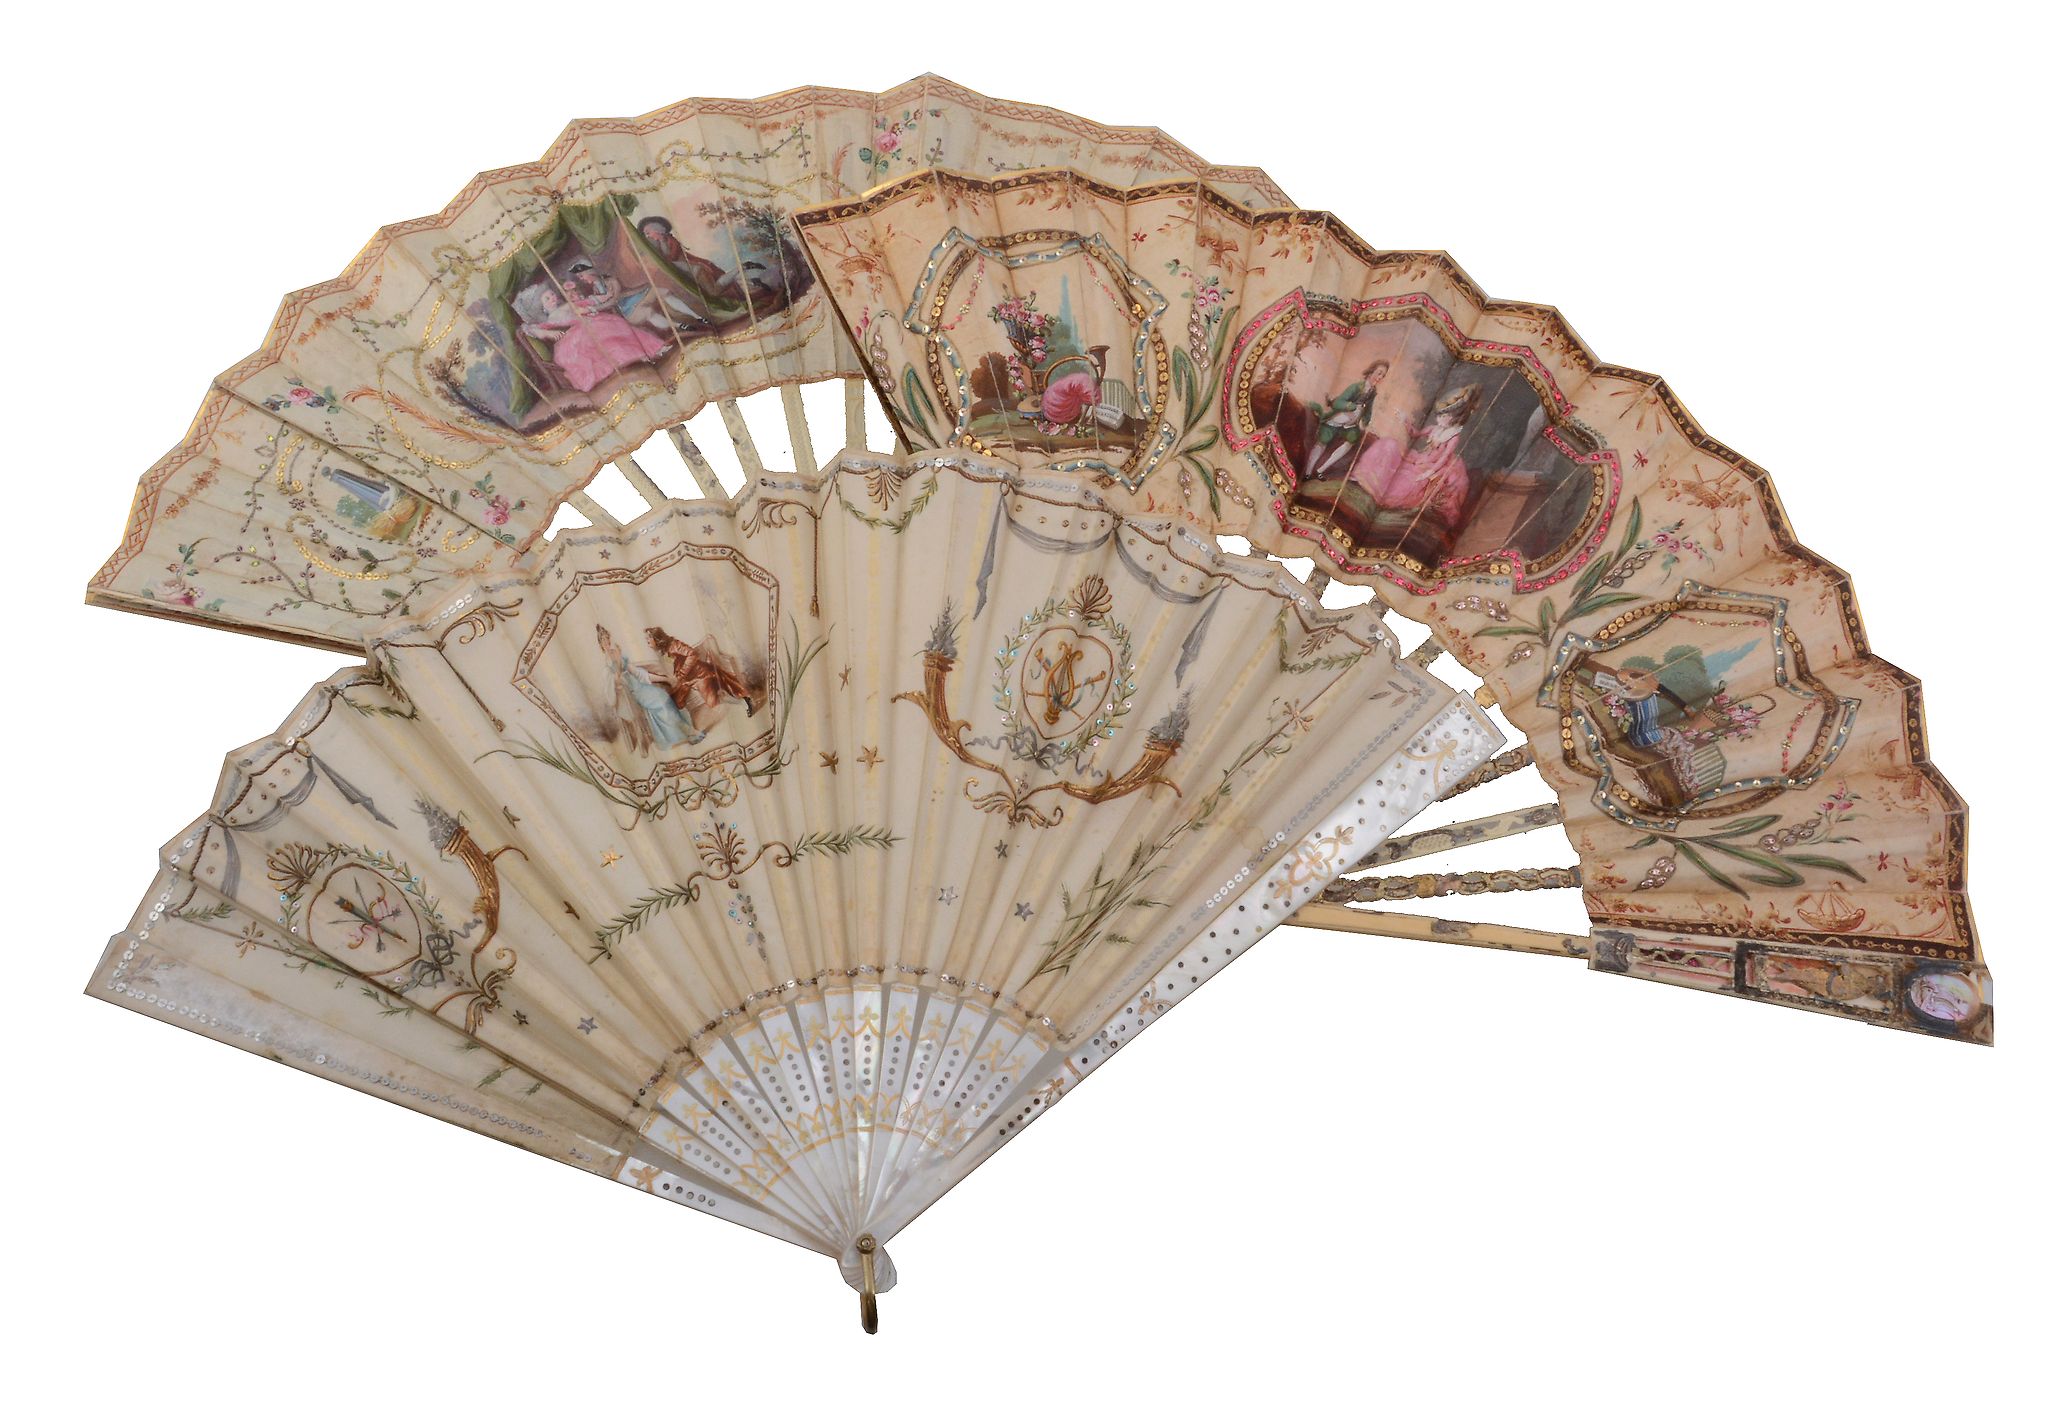 Six fans, mainly late 19th and early 20th century, painted gauze   Six fans,   mainly late 19th